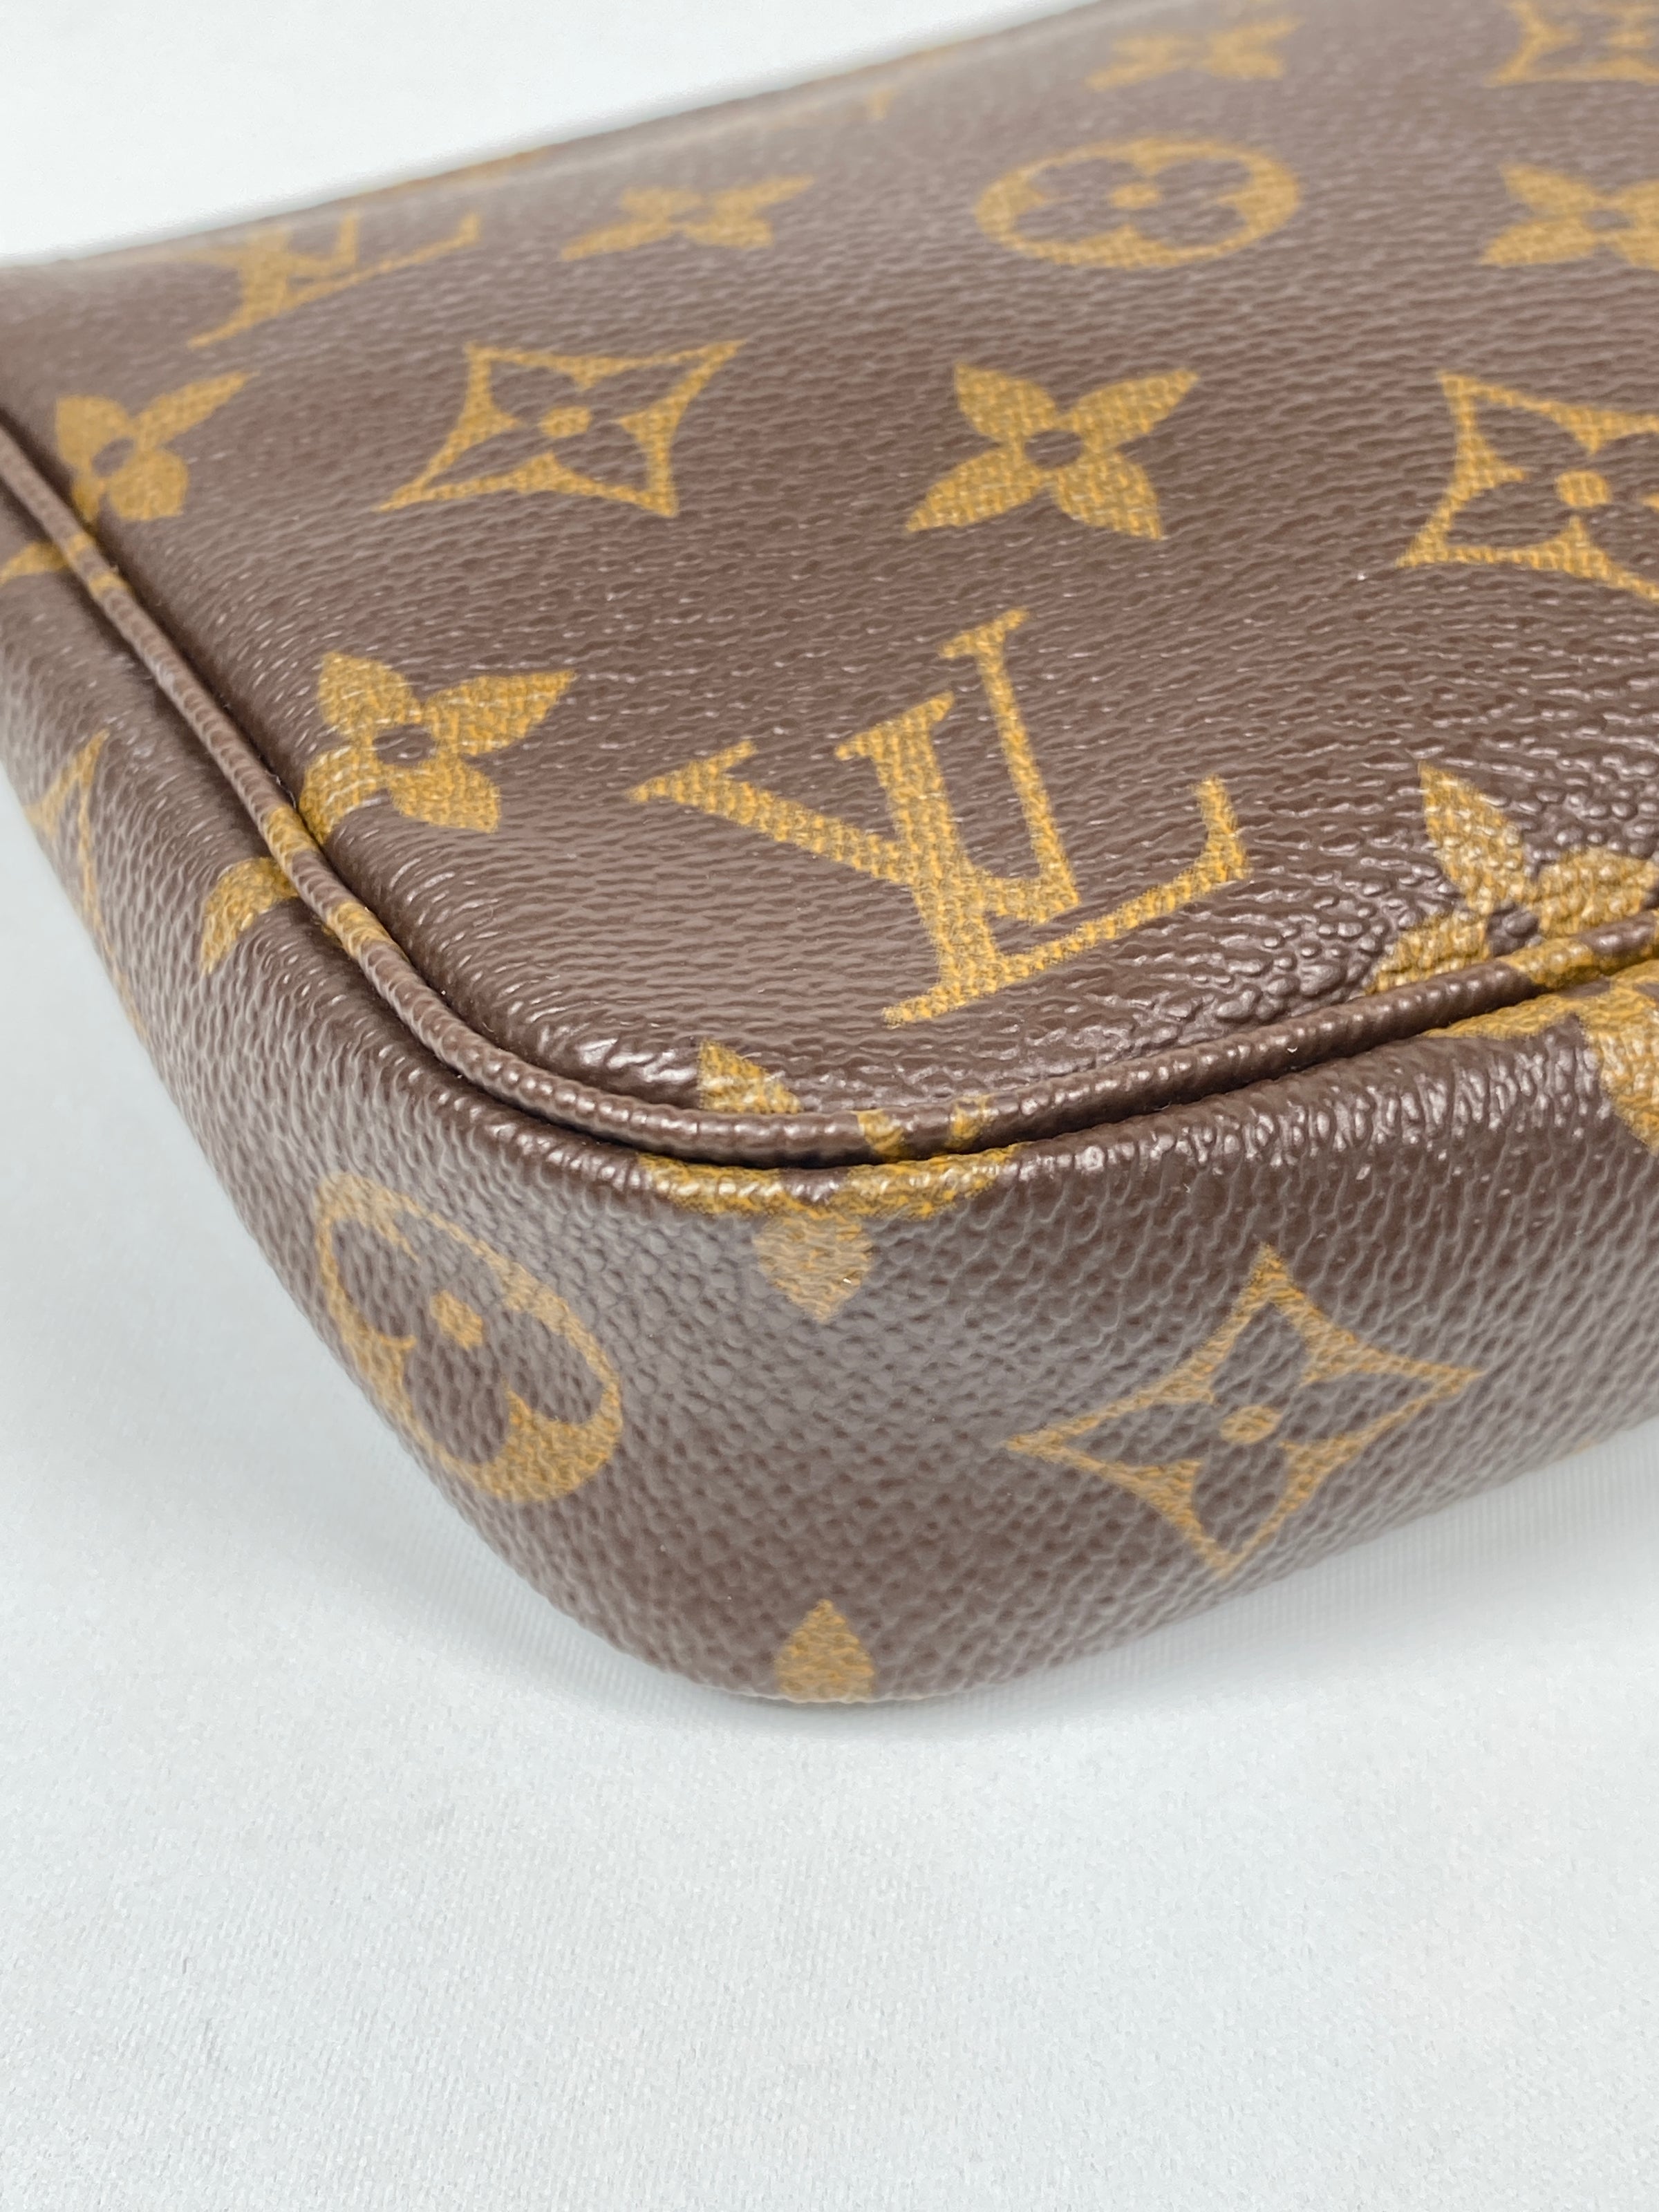 Pochette Accessoires Monogram - Wallets and Small Leather Goods